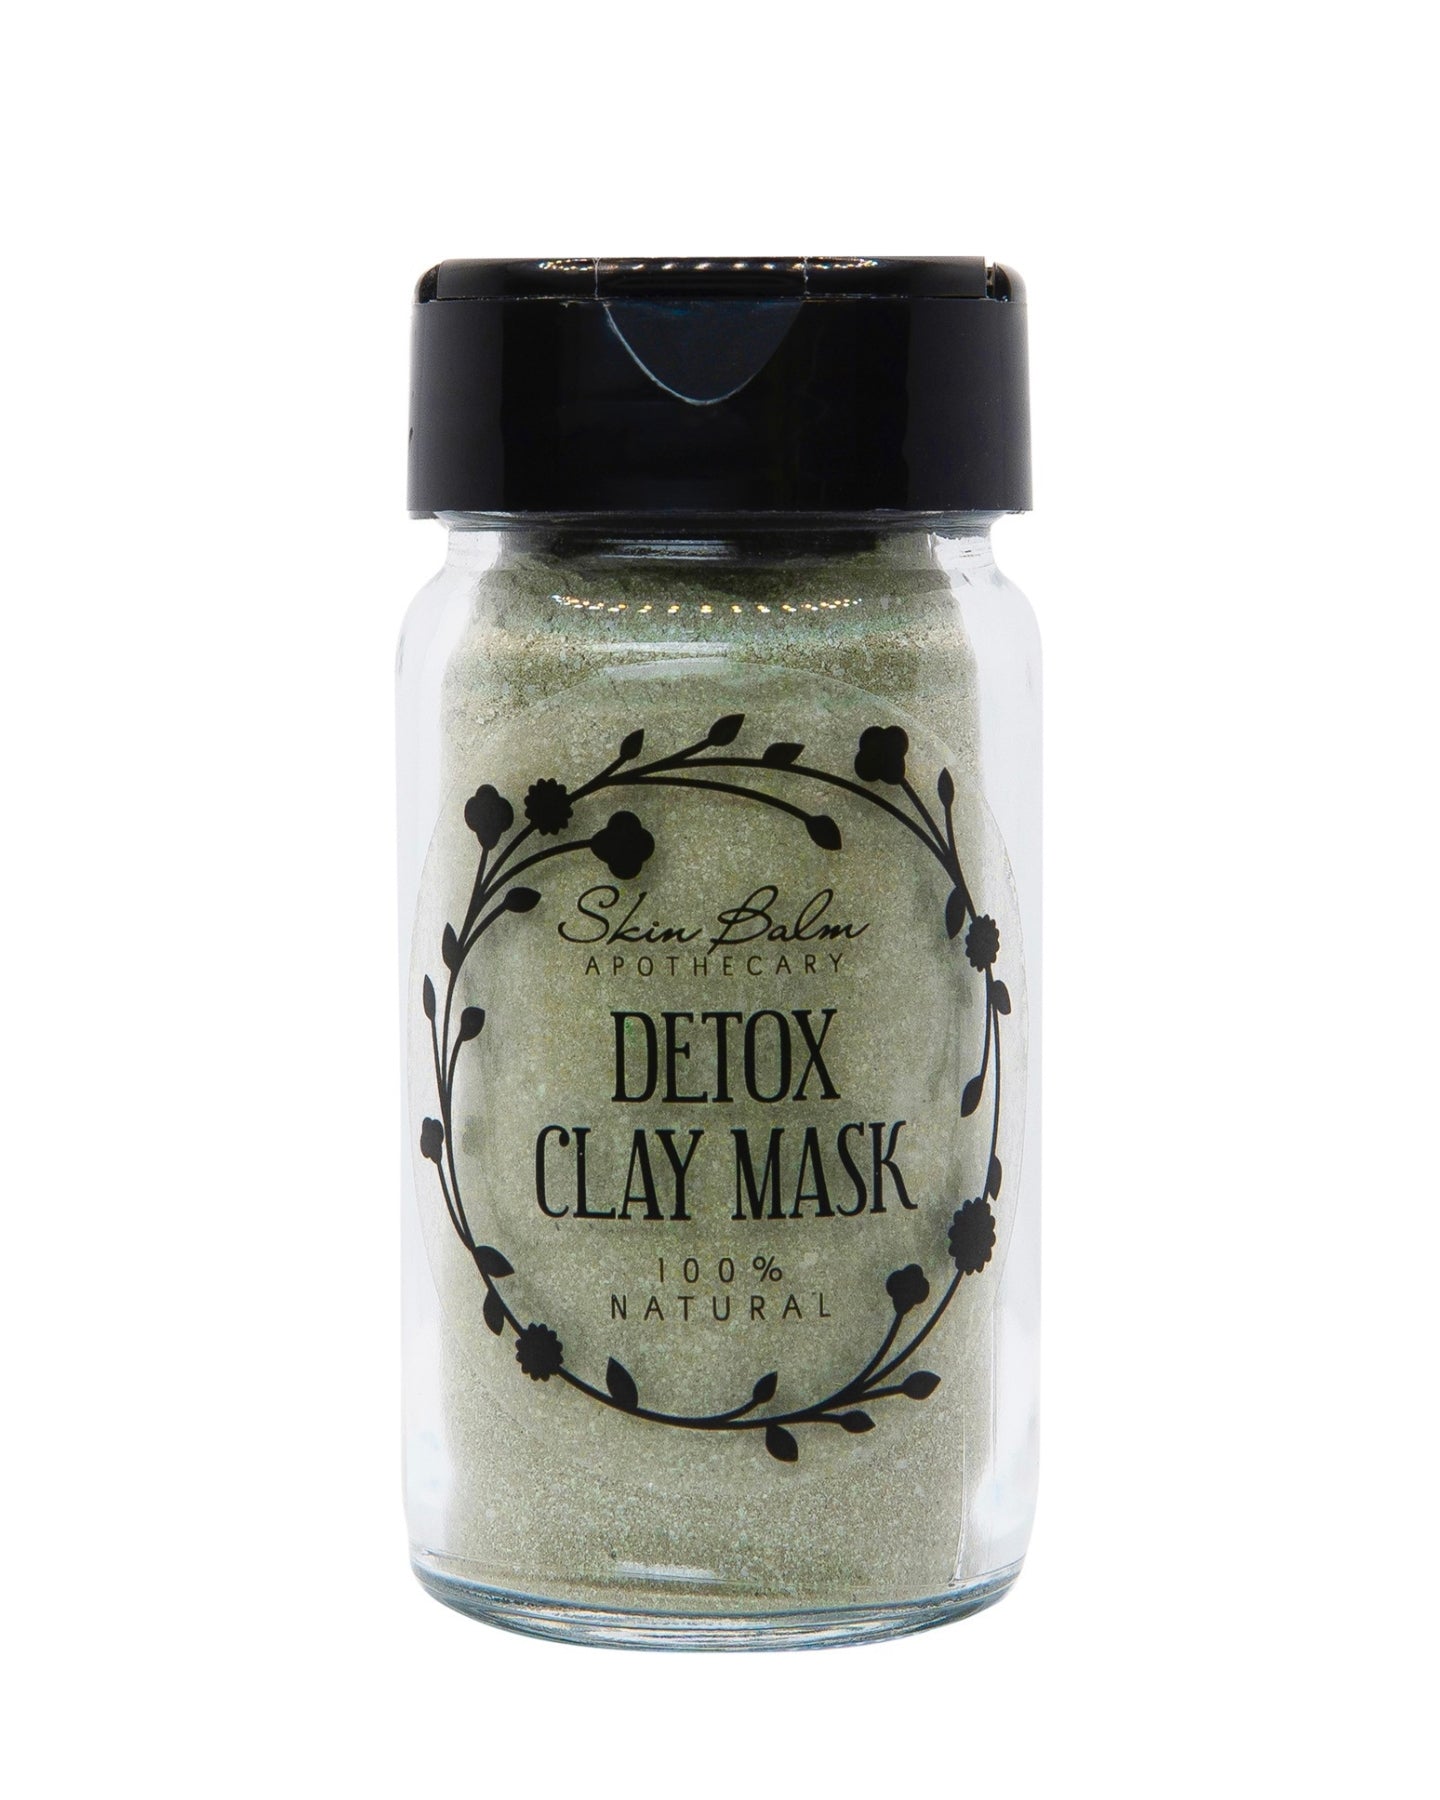 Detox Clay Mask against a white background.